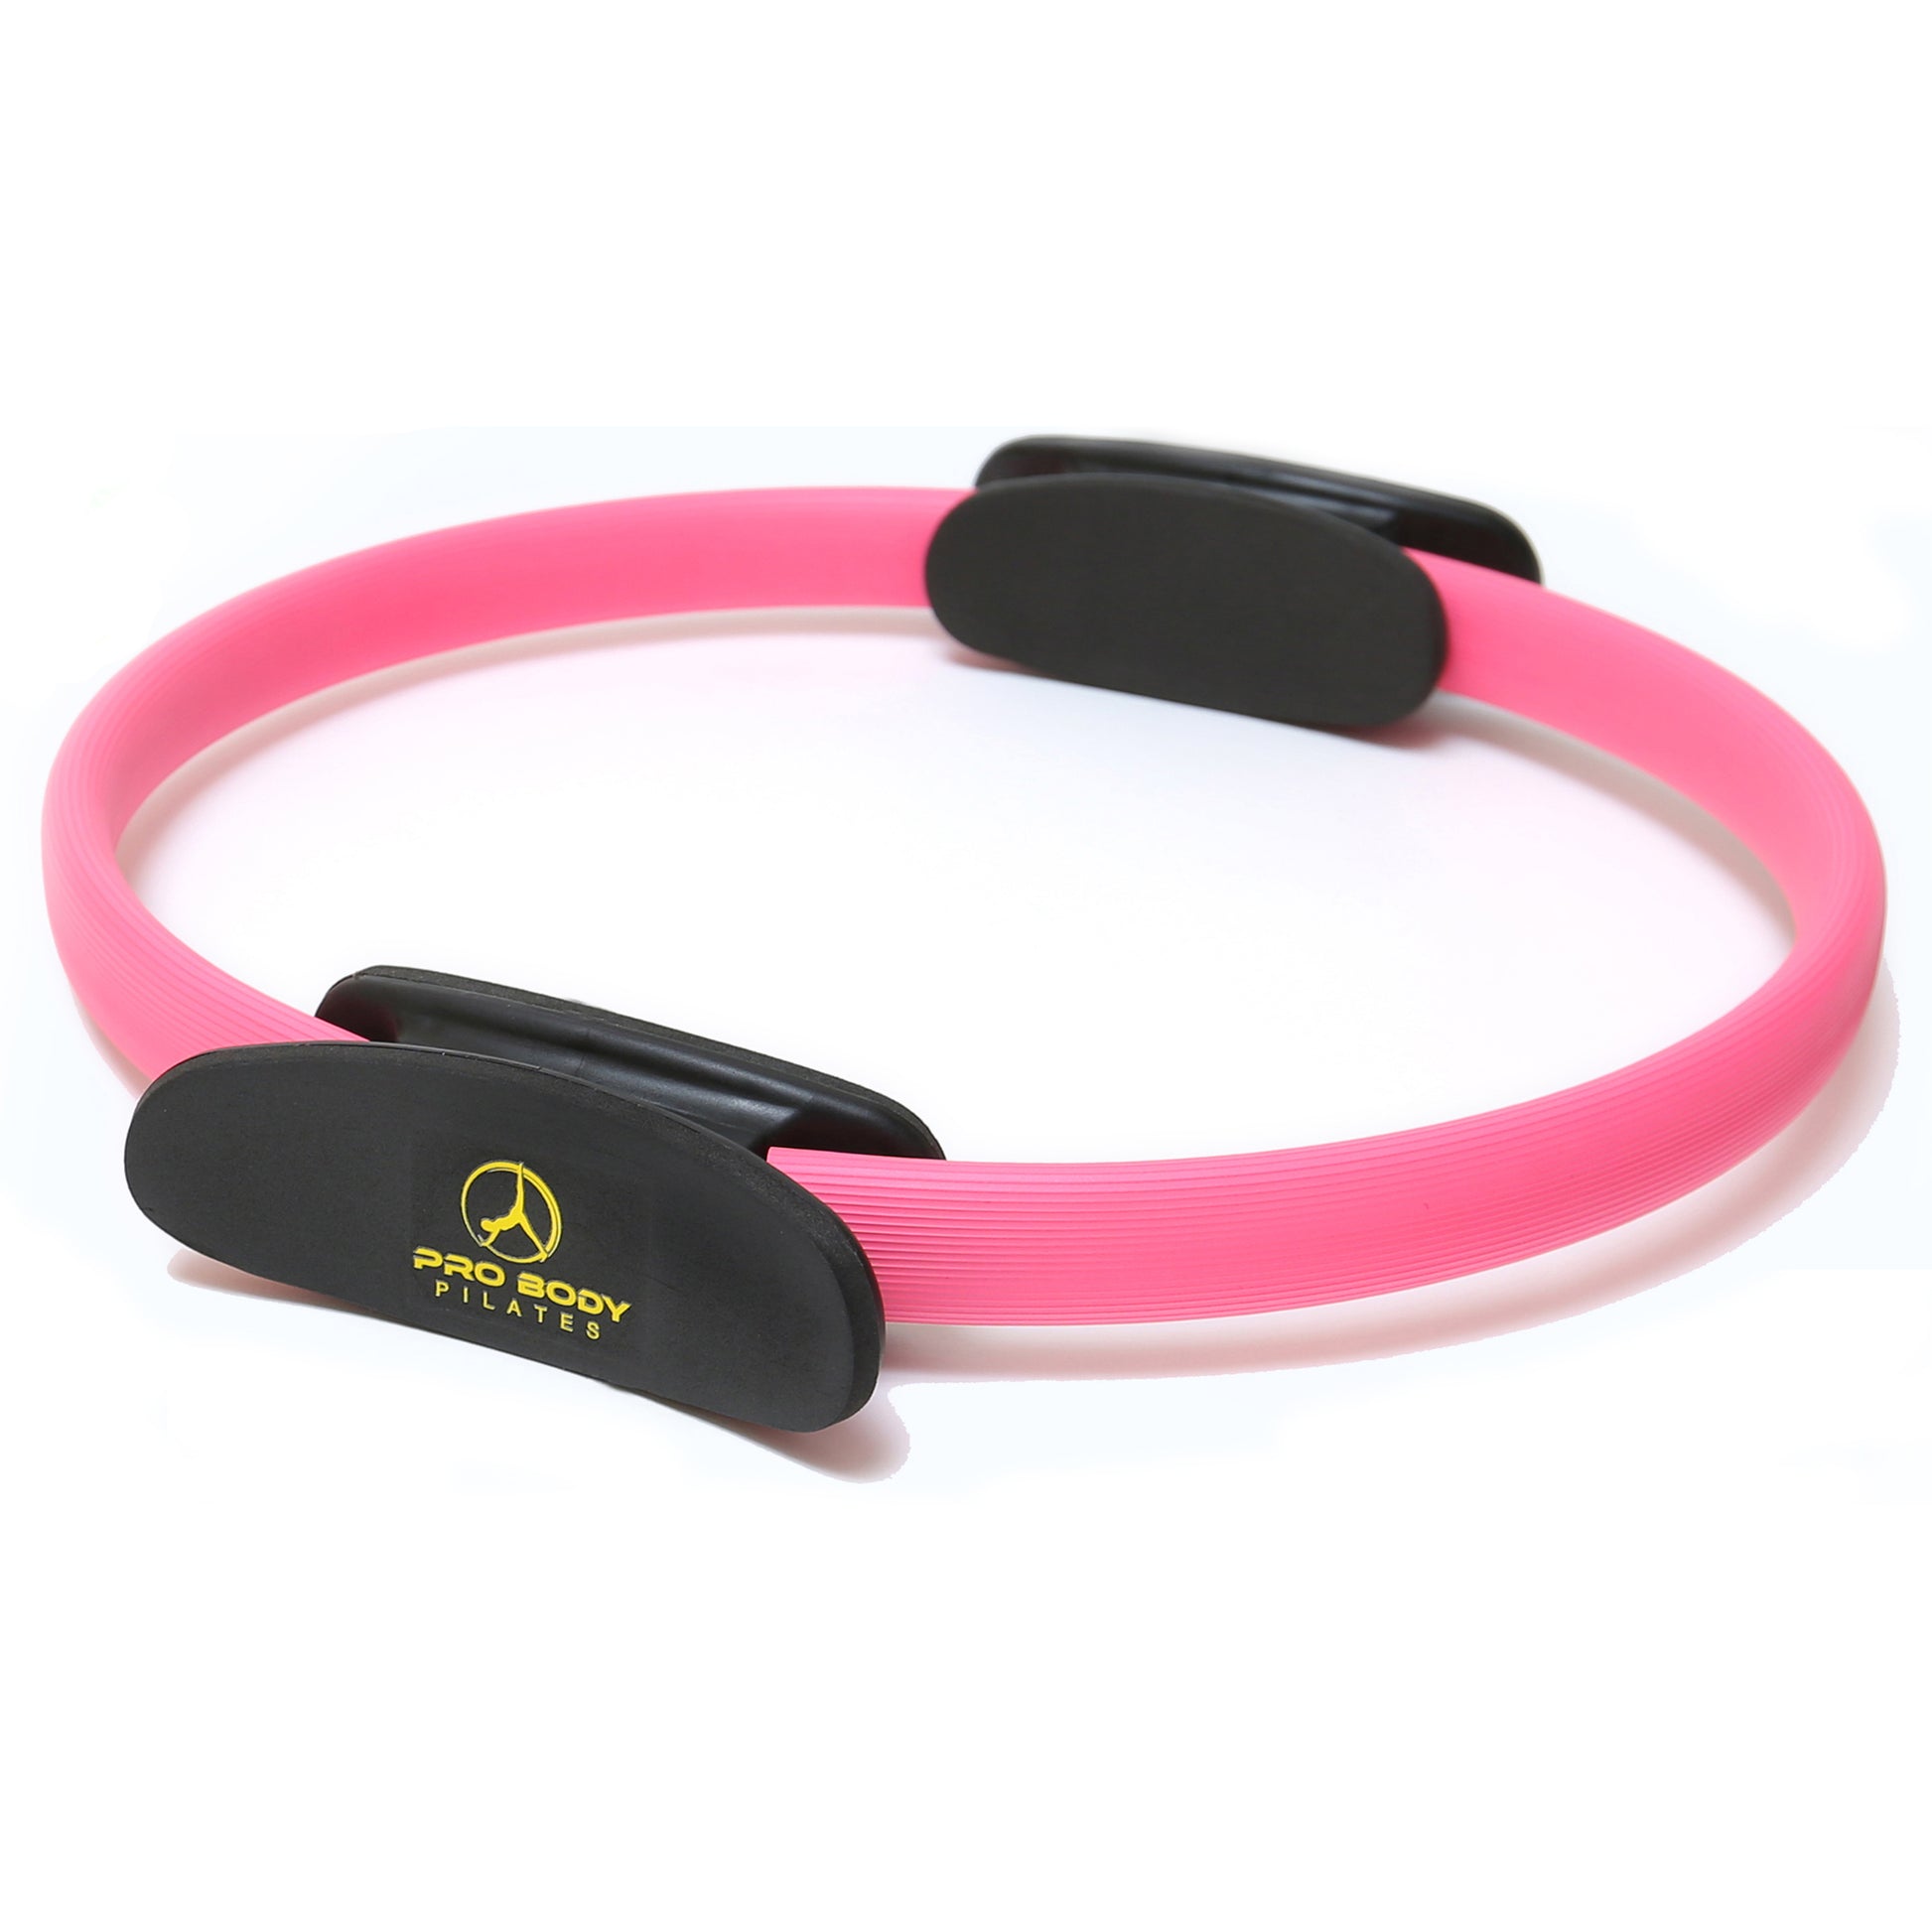 Pilates Ring for Toning Thighs, Abs and Legs – ProBody Pilates